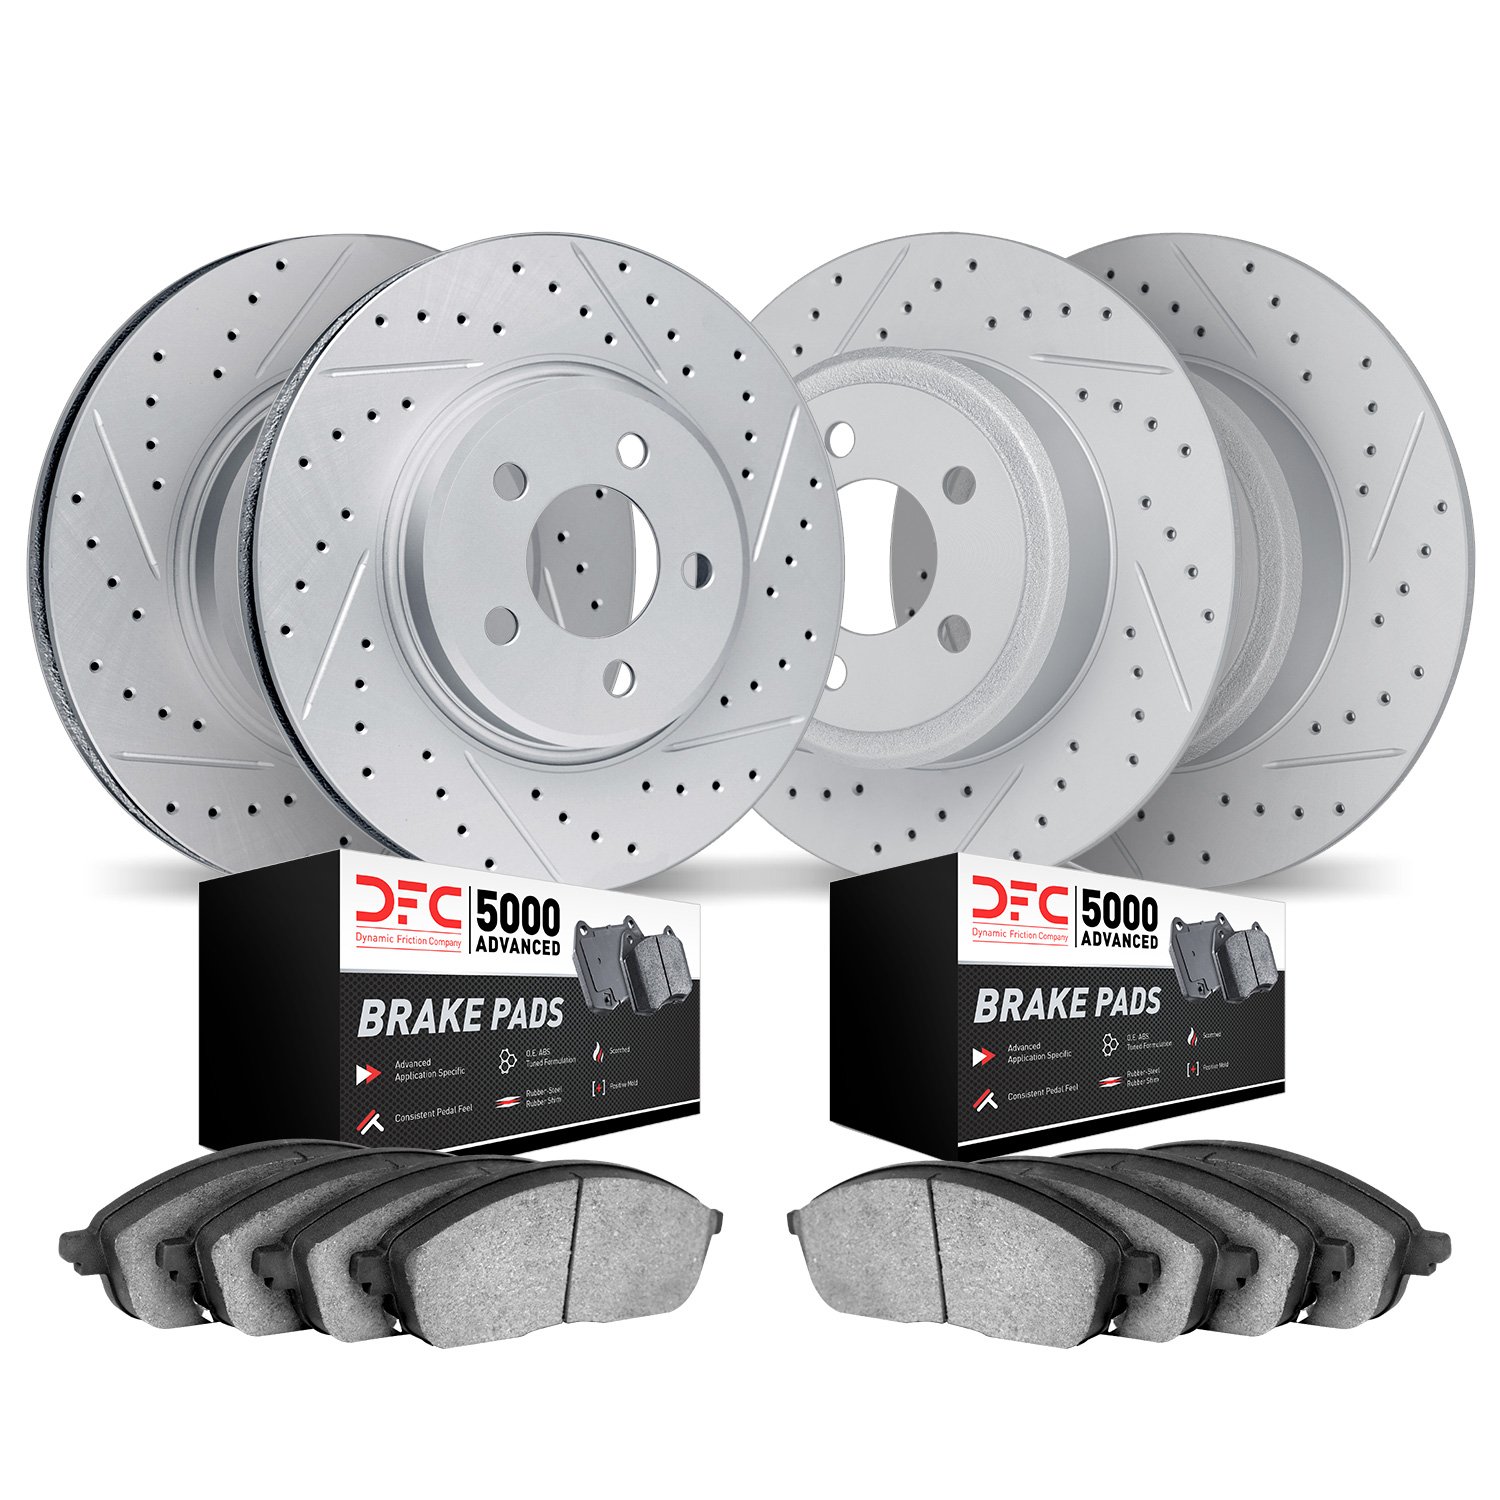 2504-59044 Geoperformance Drilled/Slotted Rotors w/5000 Advanced Brake Pads Kit, Fits Select Acura/Honda, Position: Front and Re